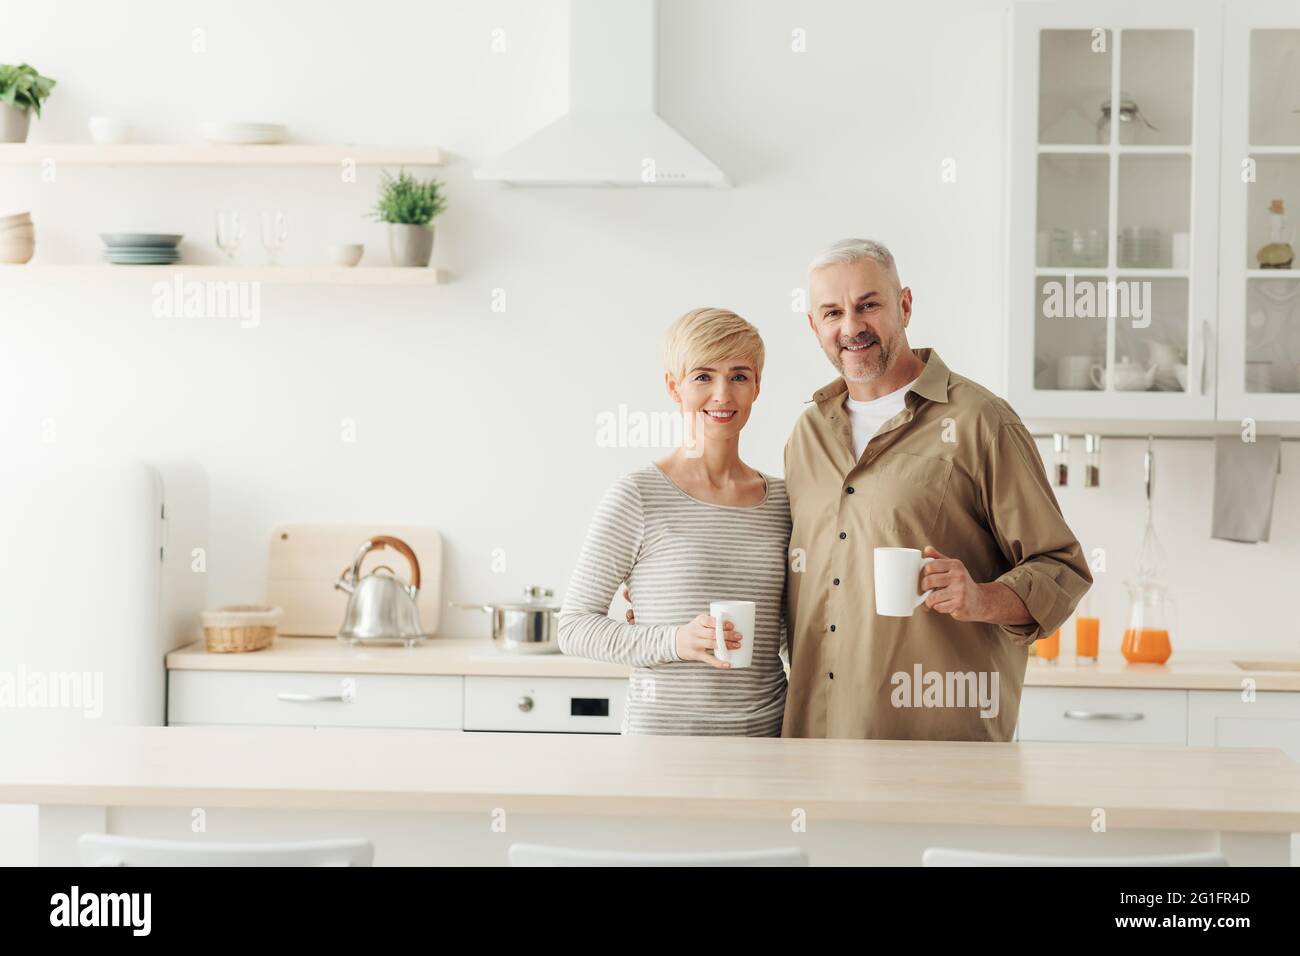 Positive emotions, cheerful mood, good morning, coffee break, breakfast cozy and home comfort Stock Photo